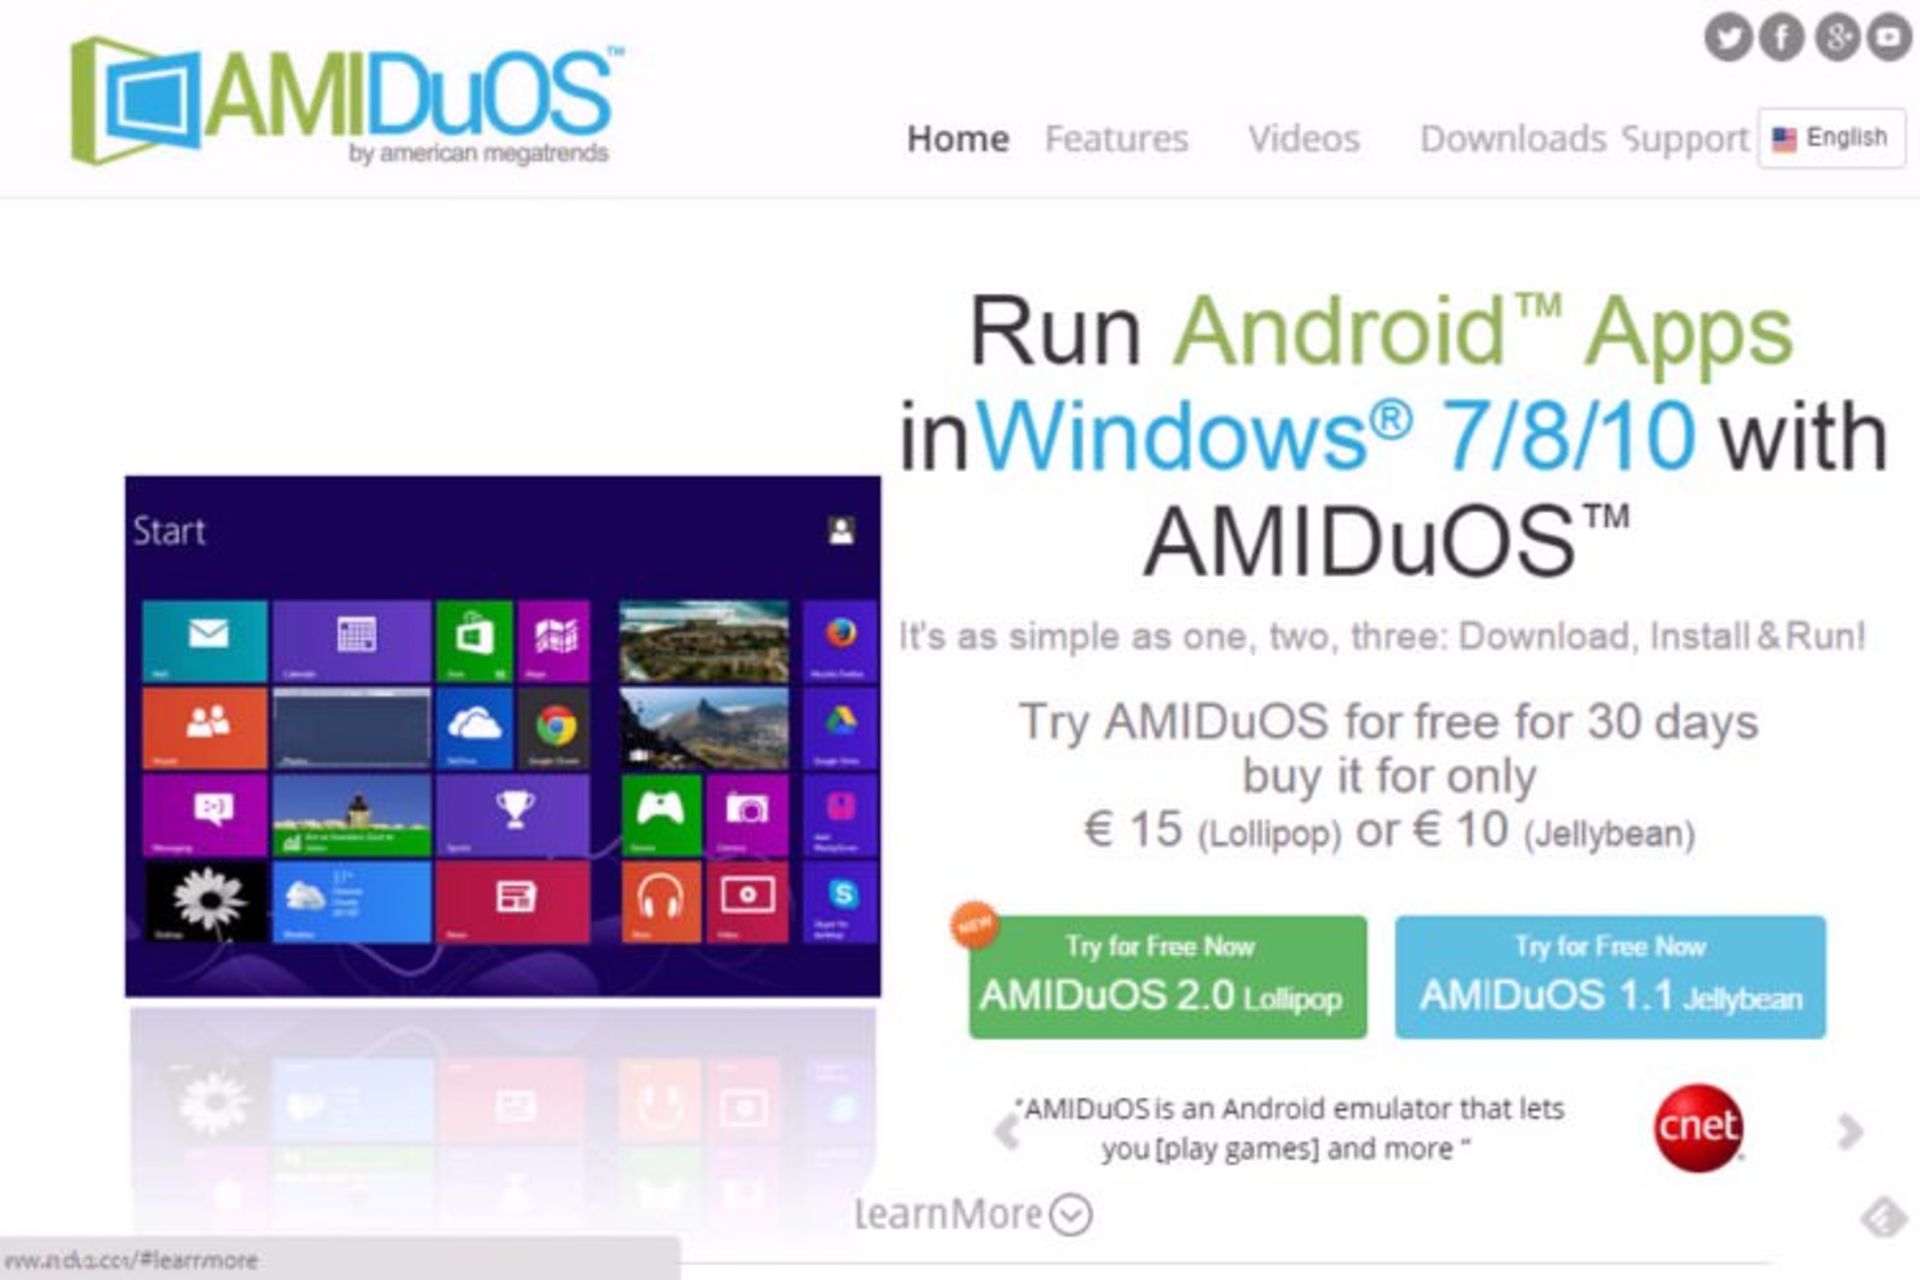 Download and install AMIDuOS 1600x1200